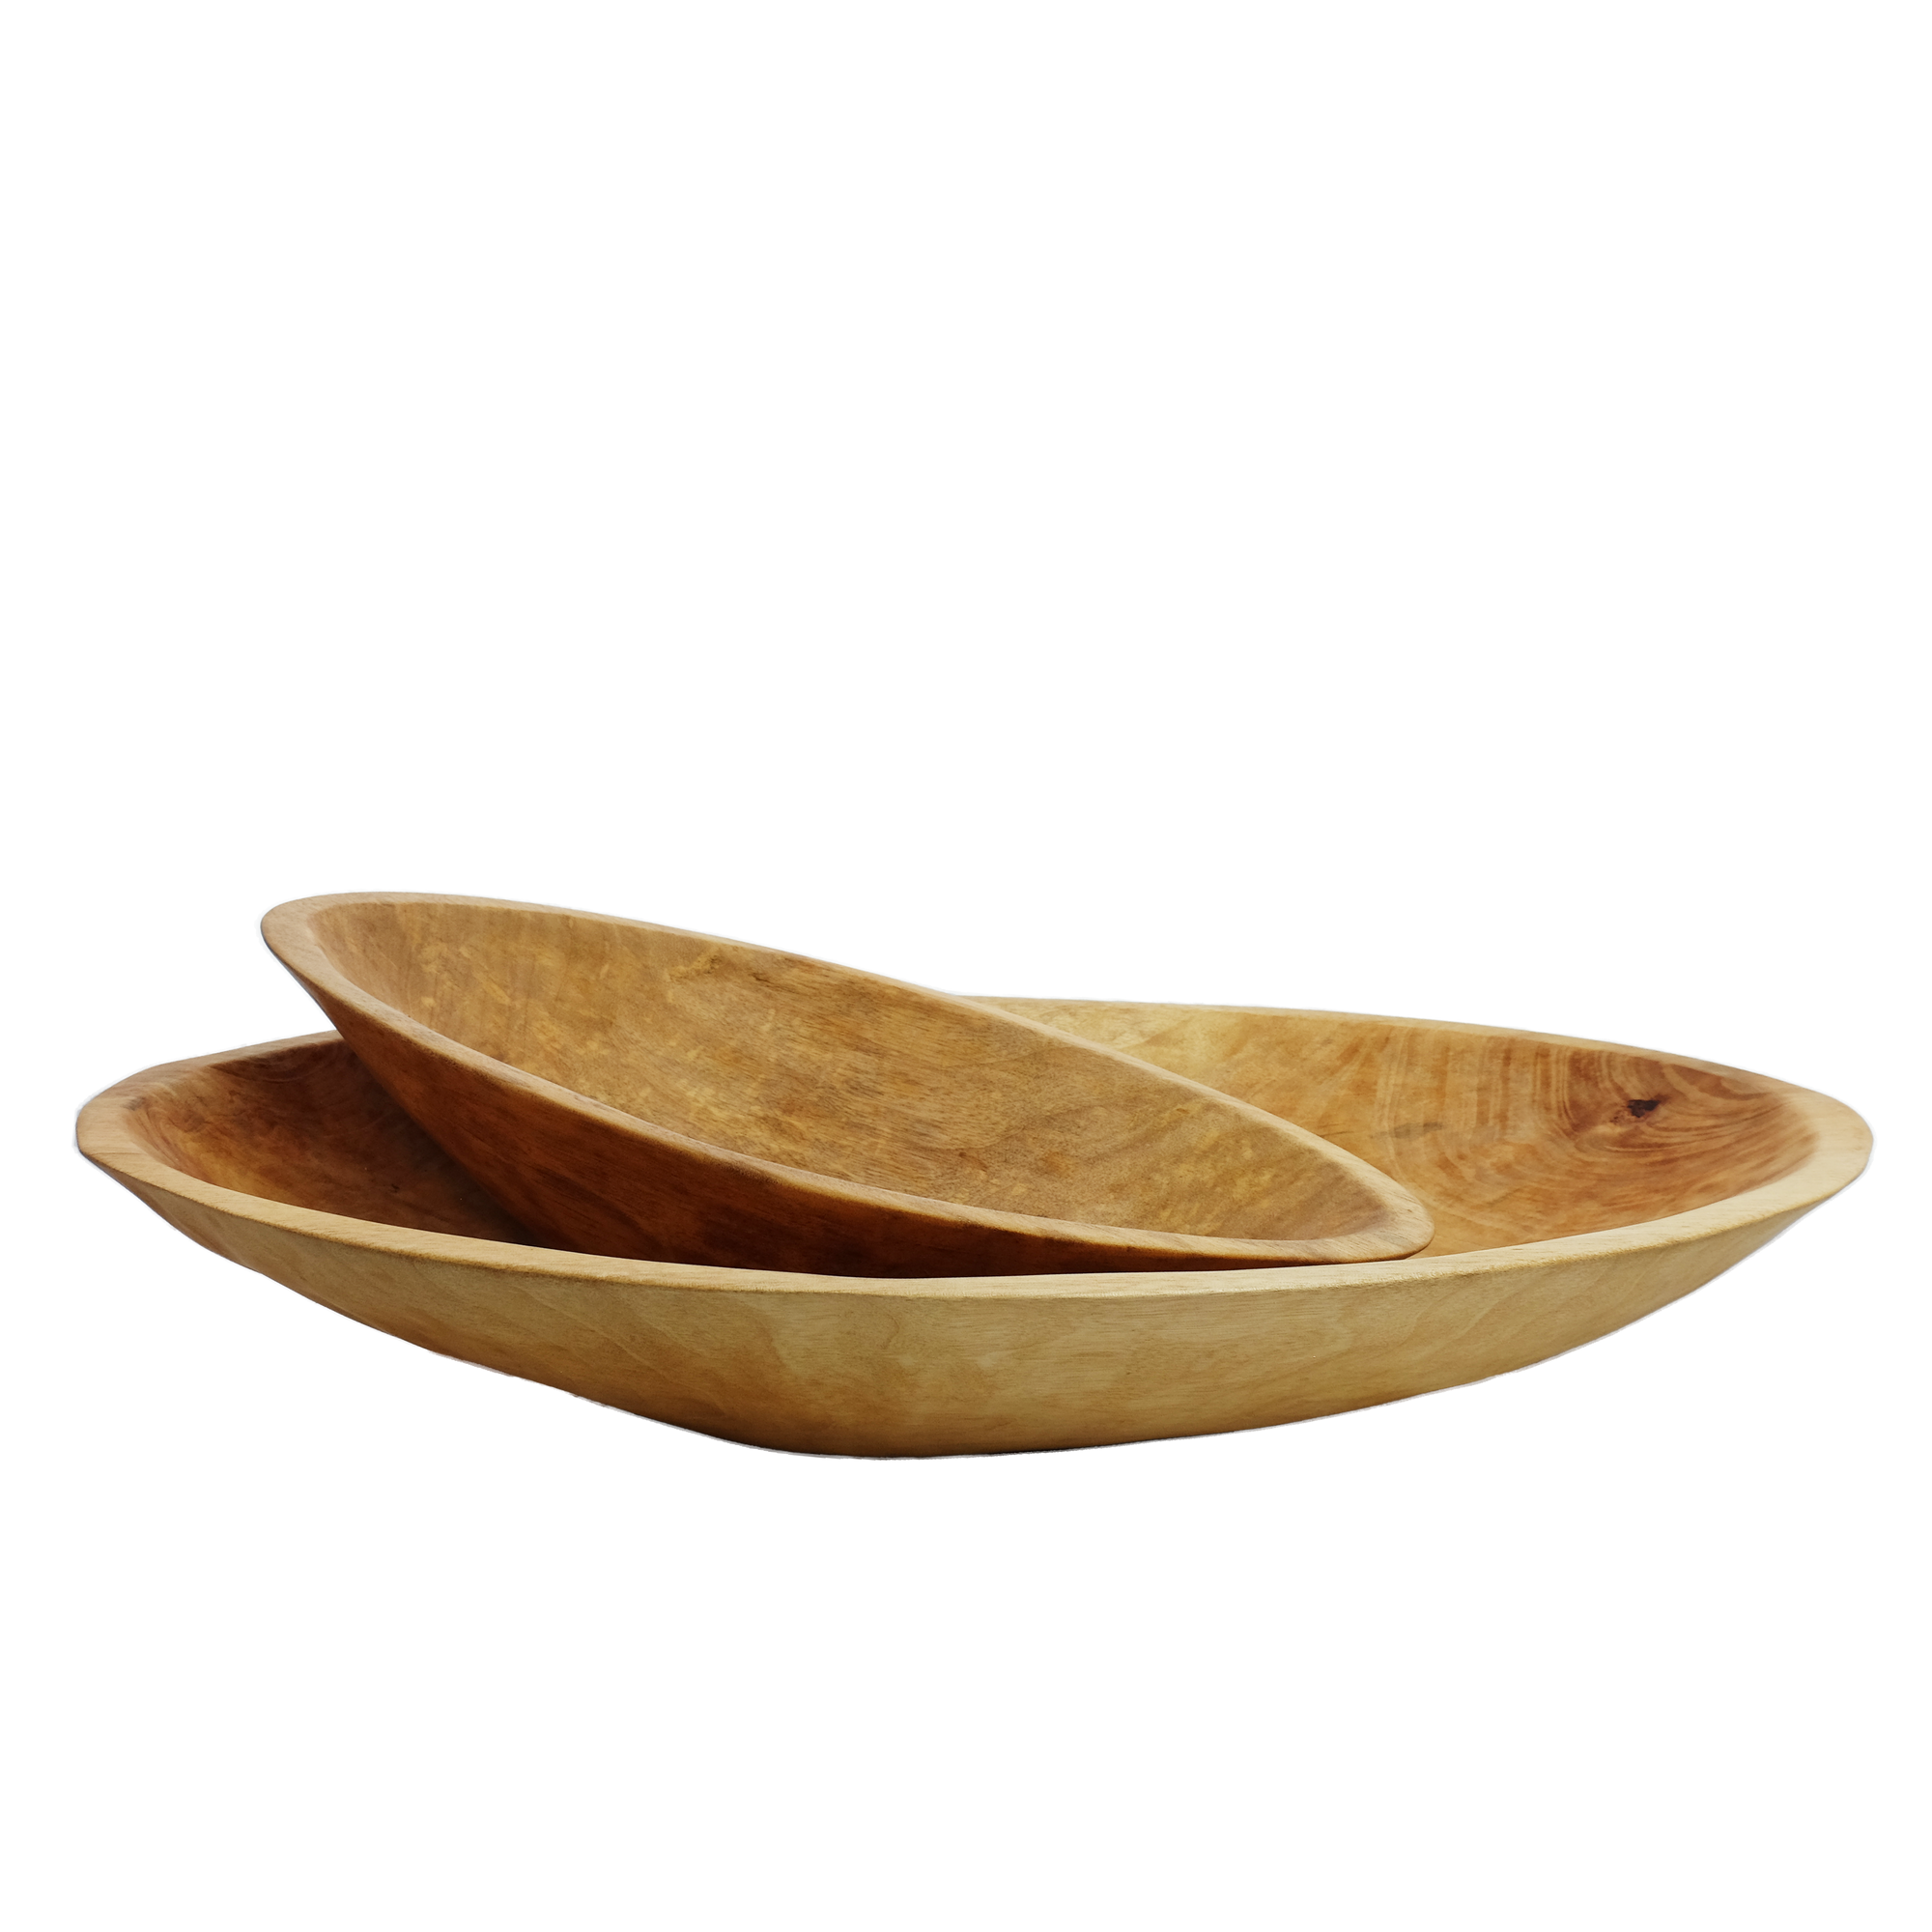 Small OVAL Wood Bowl - 19 Inches